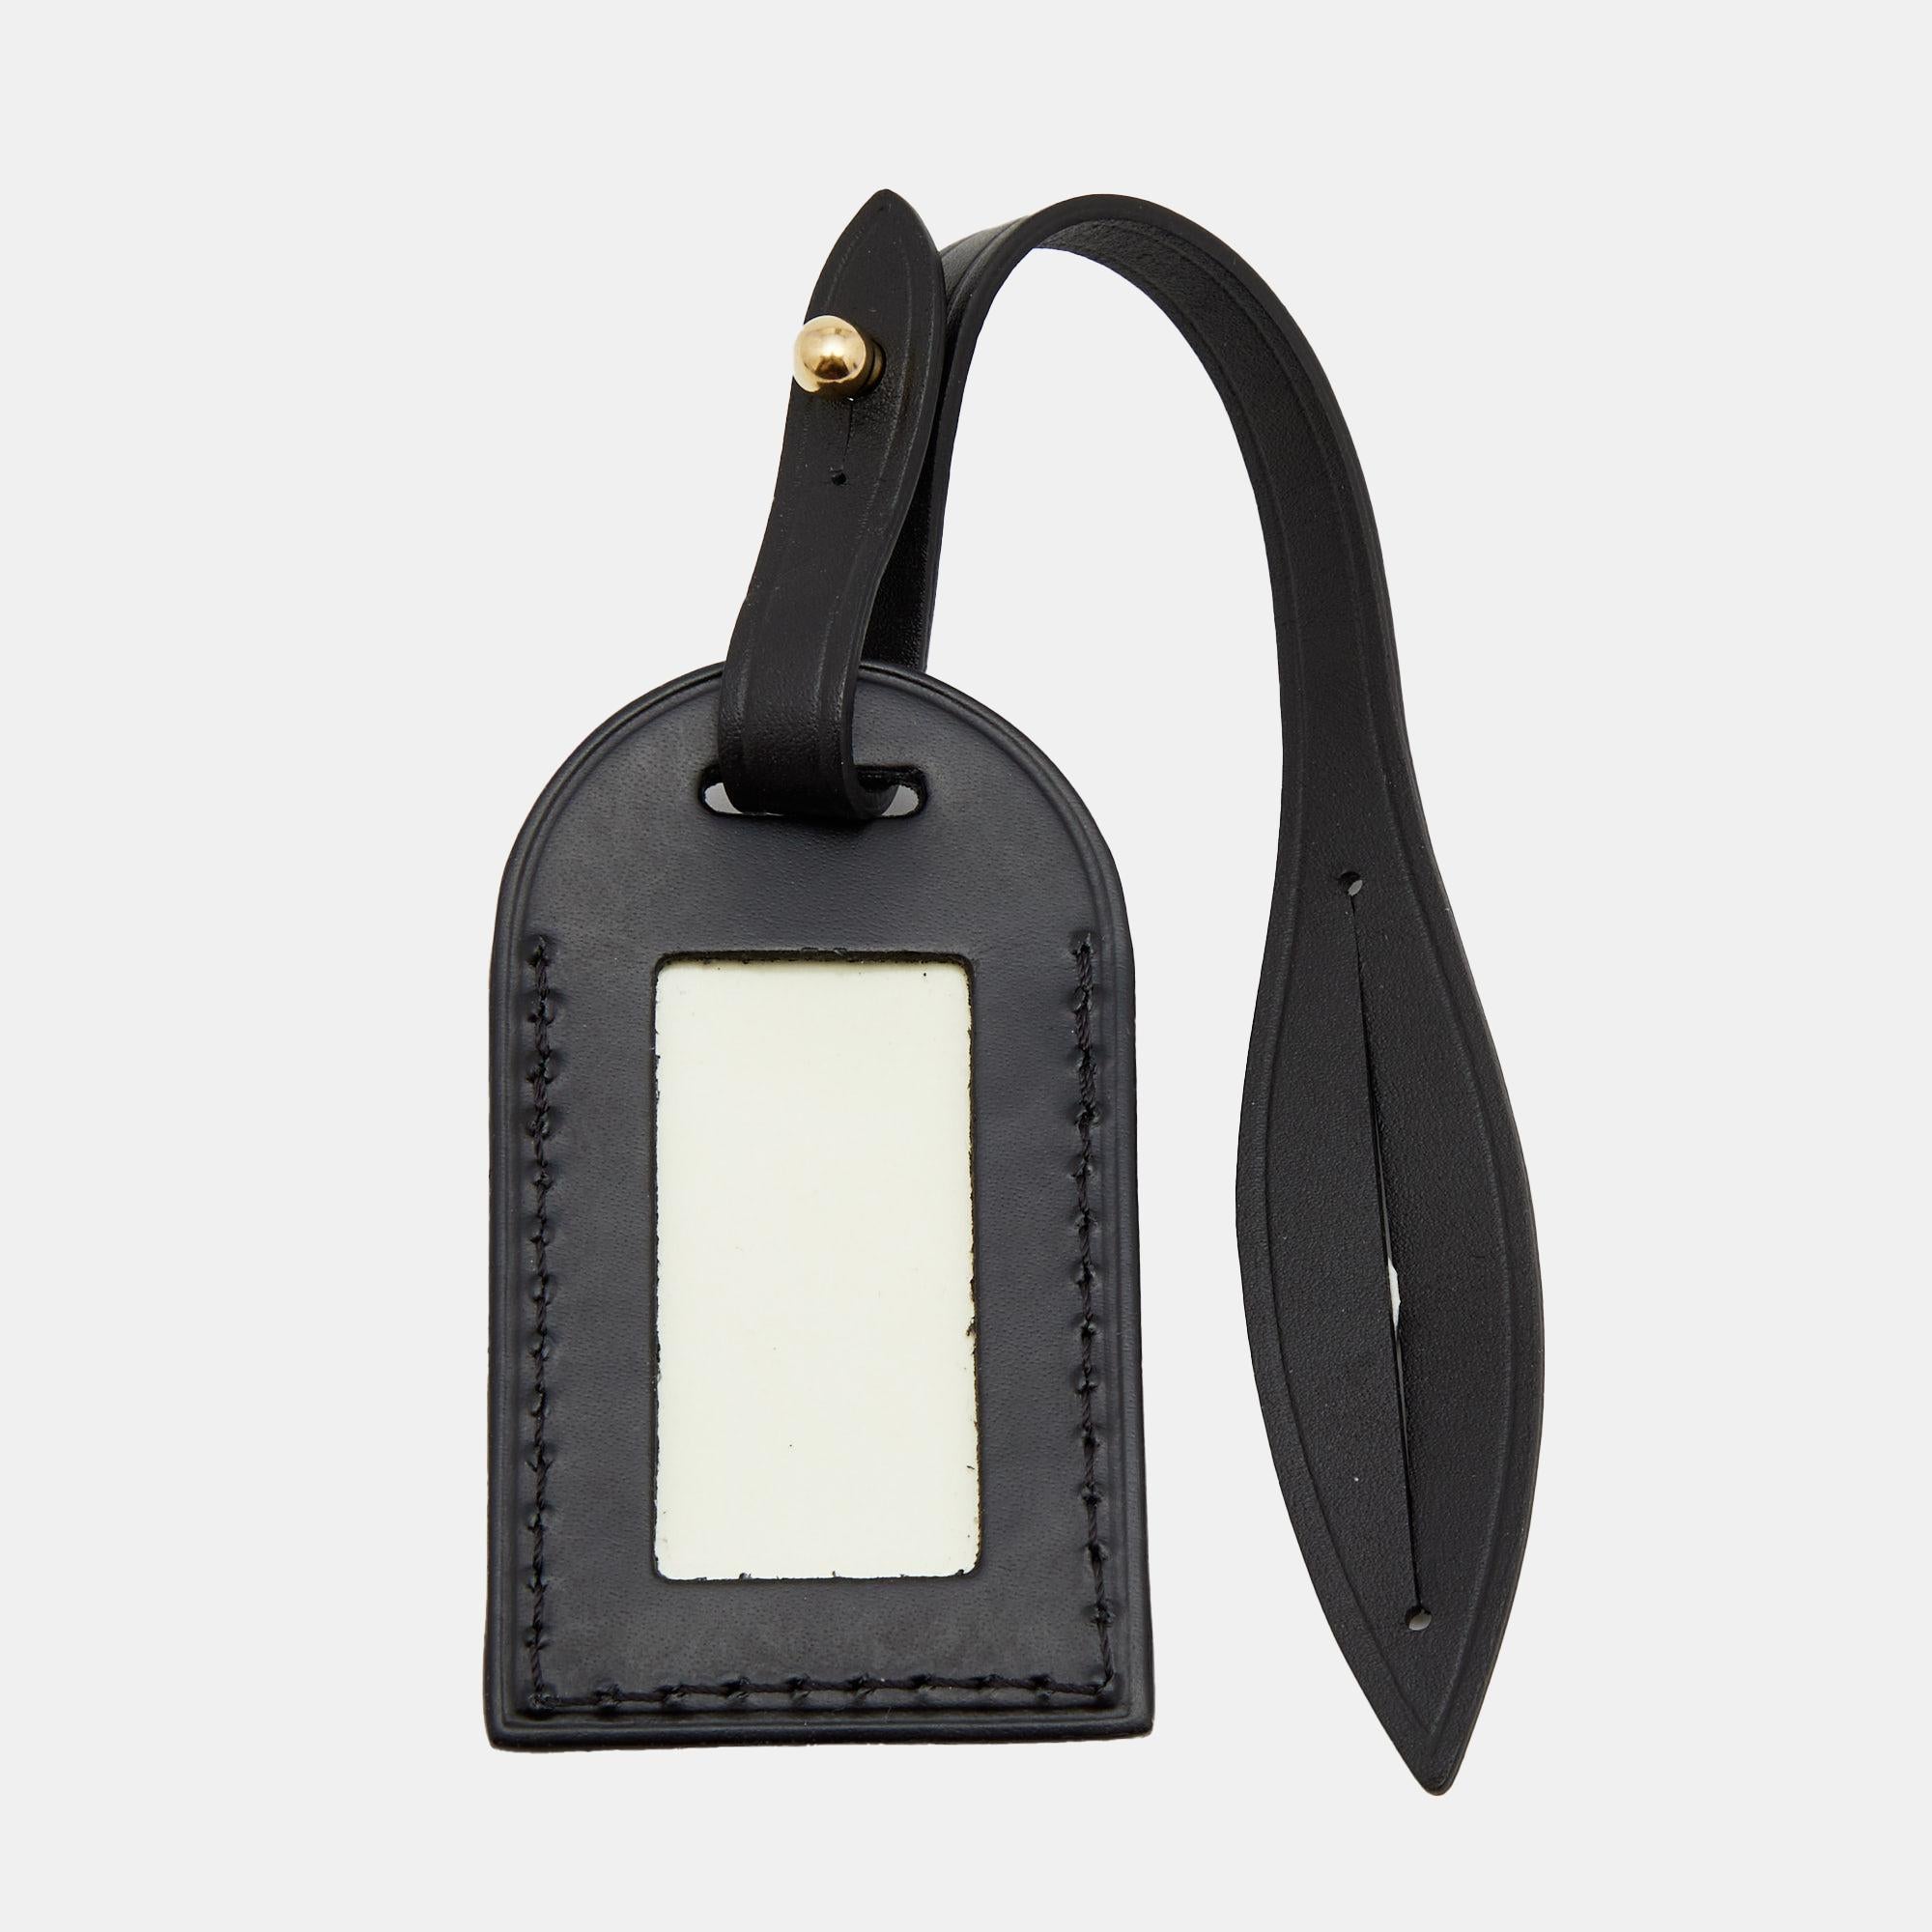 Rendered in leather, this luggage tag from Louis Vuitton will elevate the looks of your chic travel bags. It is designed in a simple shape with just the brand label on the front. It is complete with a leather strap holding a buckle. Keep your bags